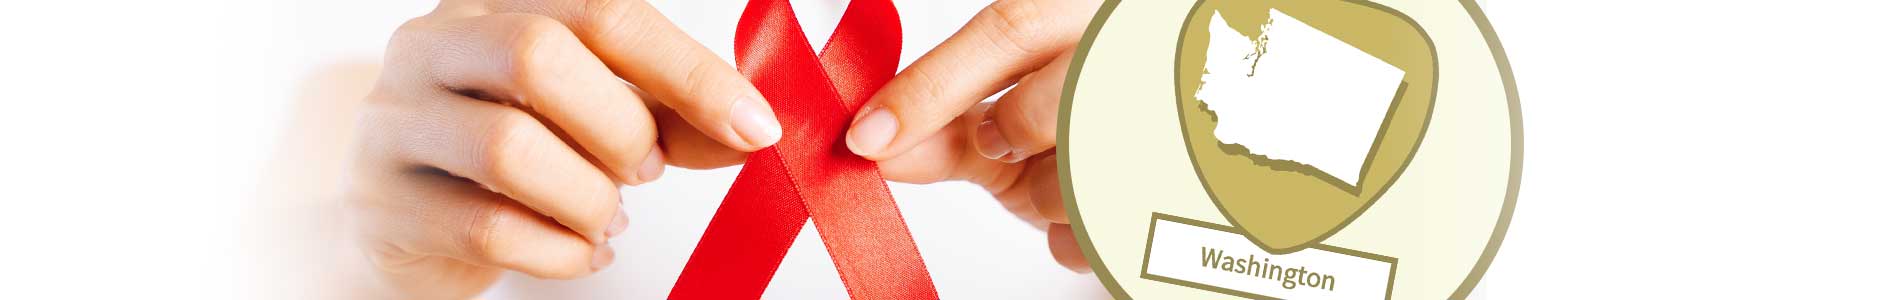 HIV/AIDS Training for Washington Healthcare Professionals (7 Hours)